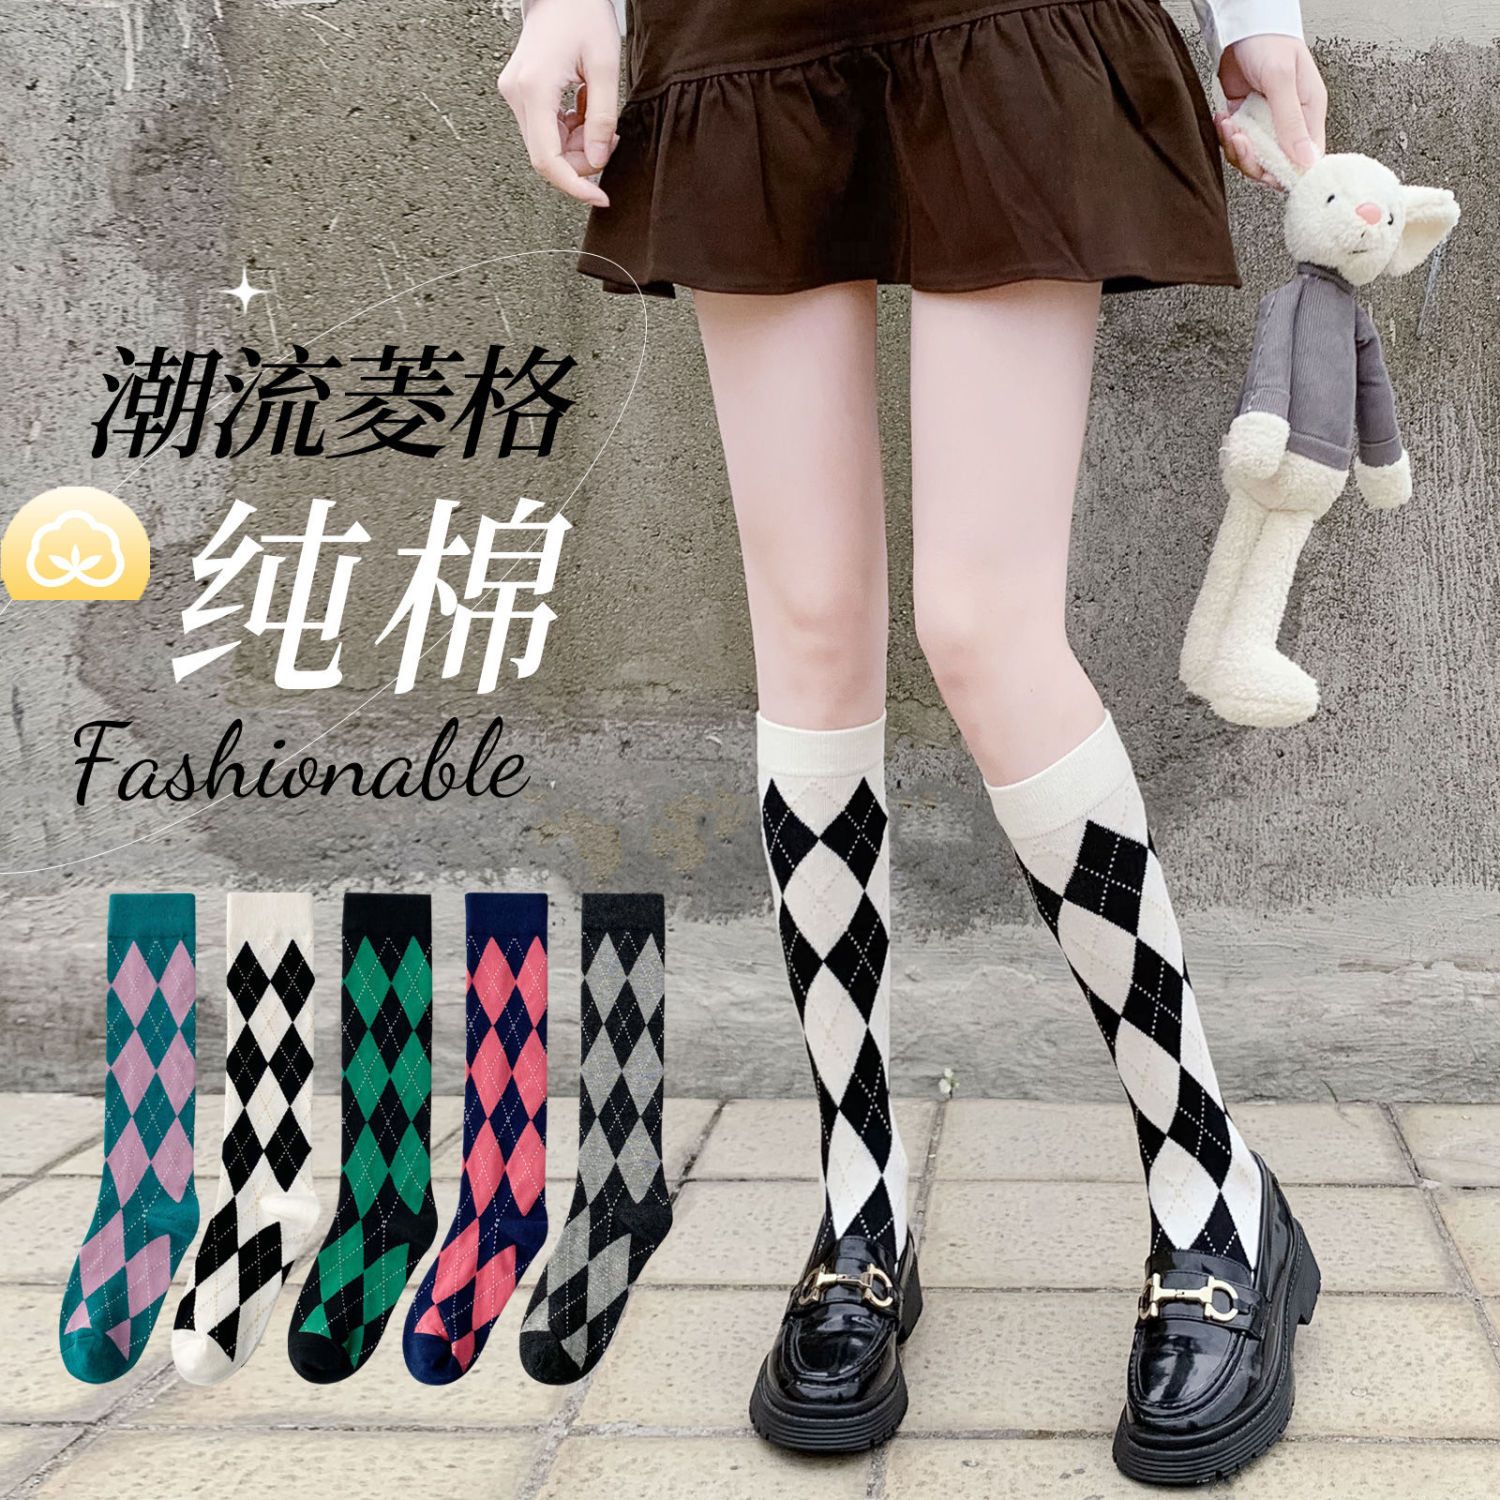 Calf socks women's spring and summer thin pure cotton JK black and white college style Lolita stockings ing tide knee socks autumn